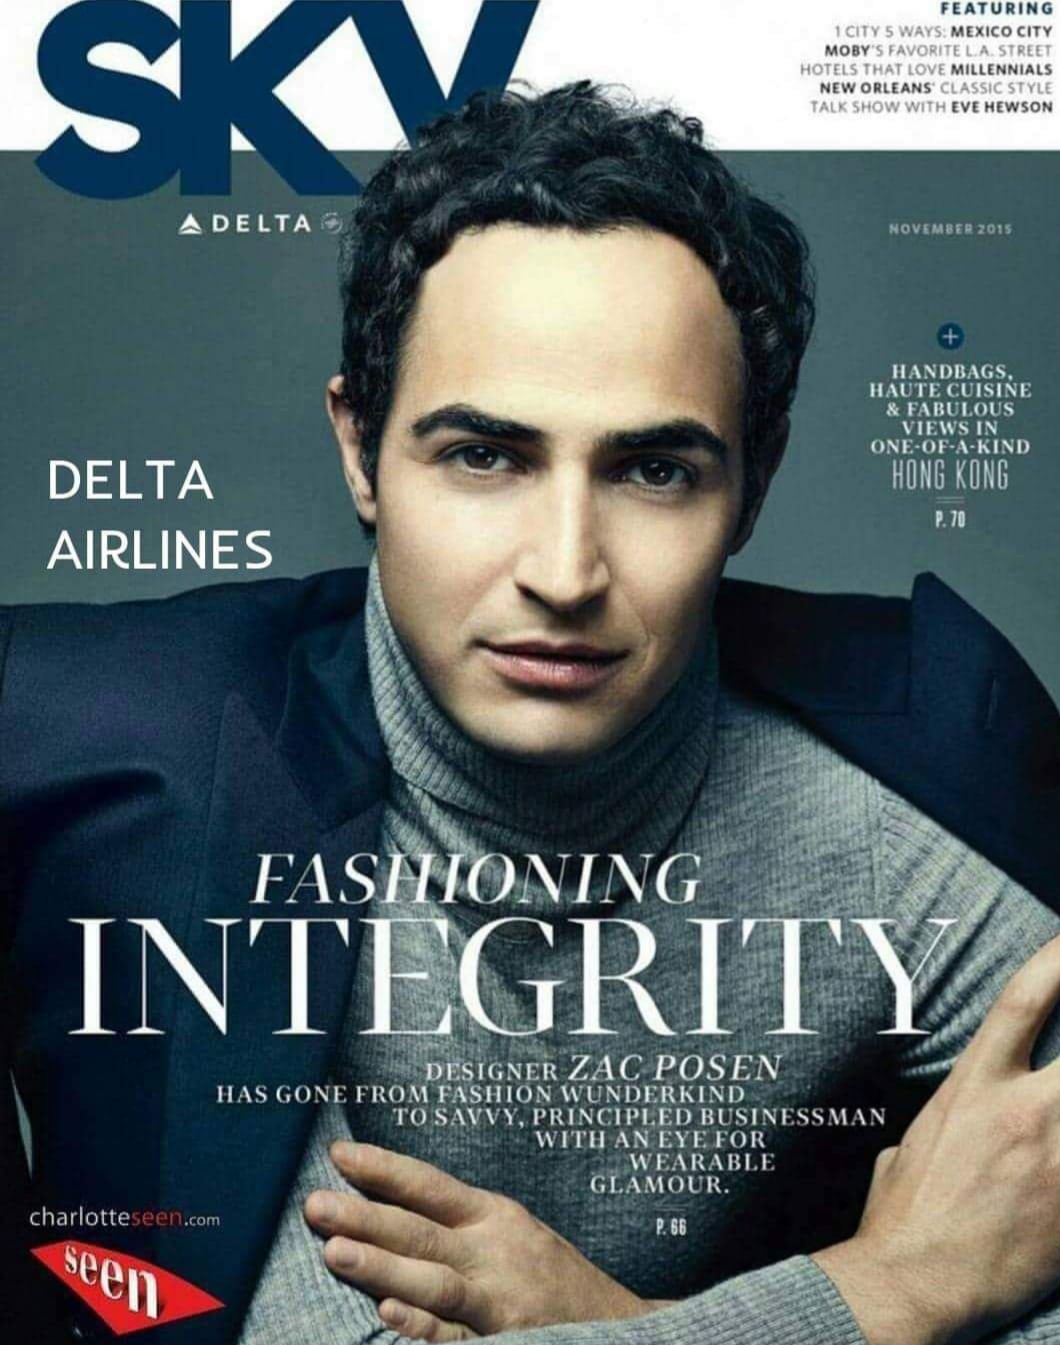 DELTA AIRLINES/ZAC POSEN Fashion Designer working with Charlotte Seen In 2016 Charlotte Seen was honored to be in the launch for Zac Posen's designs for Delta Airlines new uniforms. "Delta Air Lines gave a first look at long-awaited new crew uniforms for more than 60,000 workers in 2016 and was very honored to have Charlotte Seen to assist us with our models, logistics, show productions and back of house." said E. Dimbiloglu. Charlotte Seen had the pleasure to work with celebrity New York fashion designer Zac Posen, whose work has included outfits for high-profile women such as first lady Michelle Obama, Uma Thurman, Gwyneth Paltrow, Claire Danes and Rhianna. Given Posen's status as a star of the red carpet, set the partnership with Delta and has heightened anticipation among industry observers about the carrier's new look.